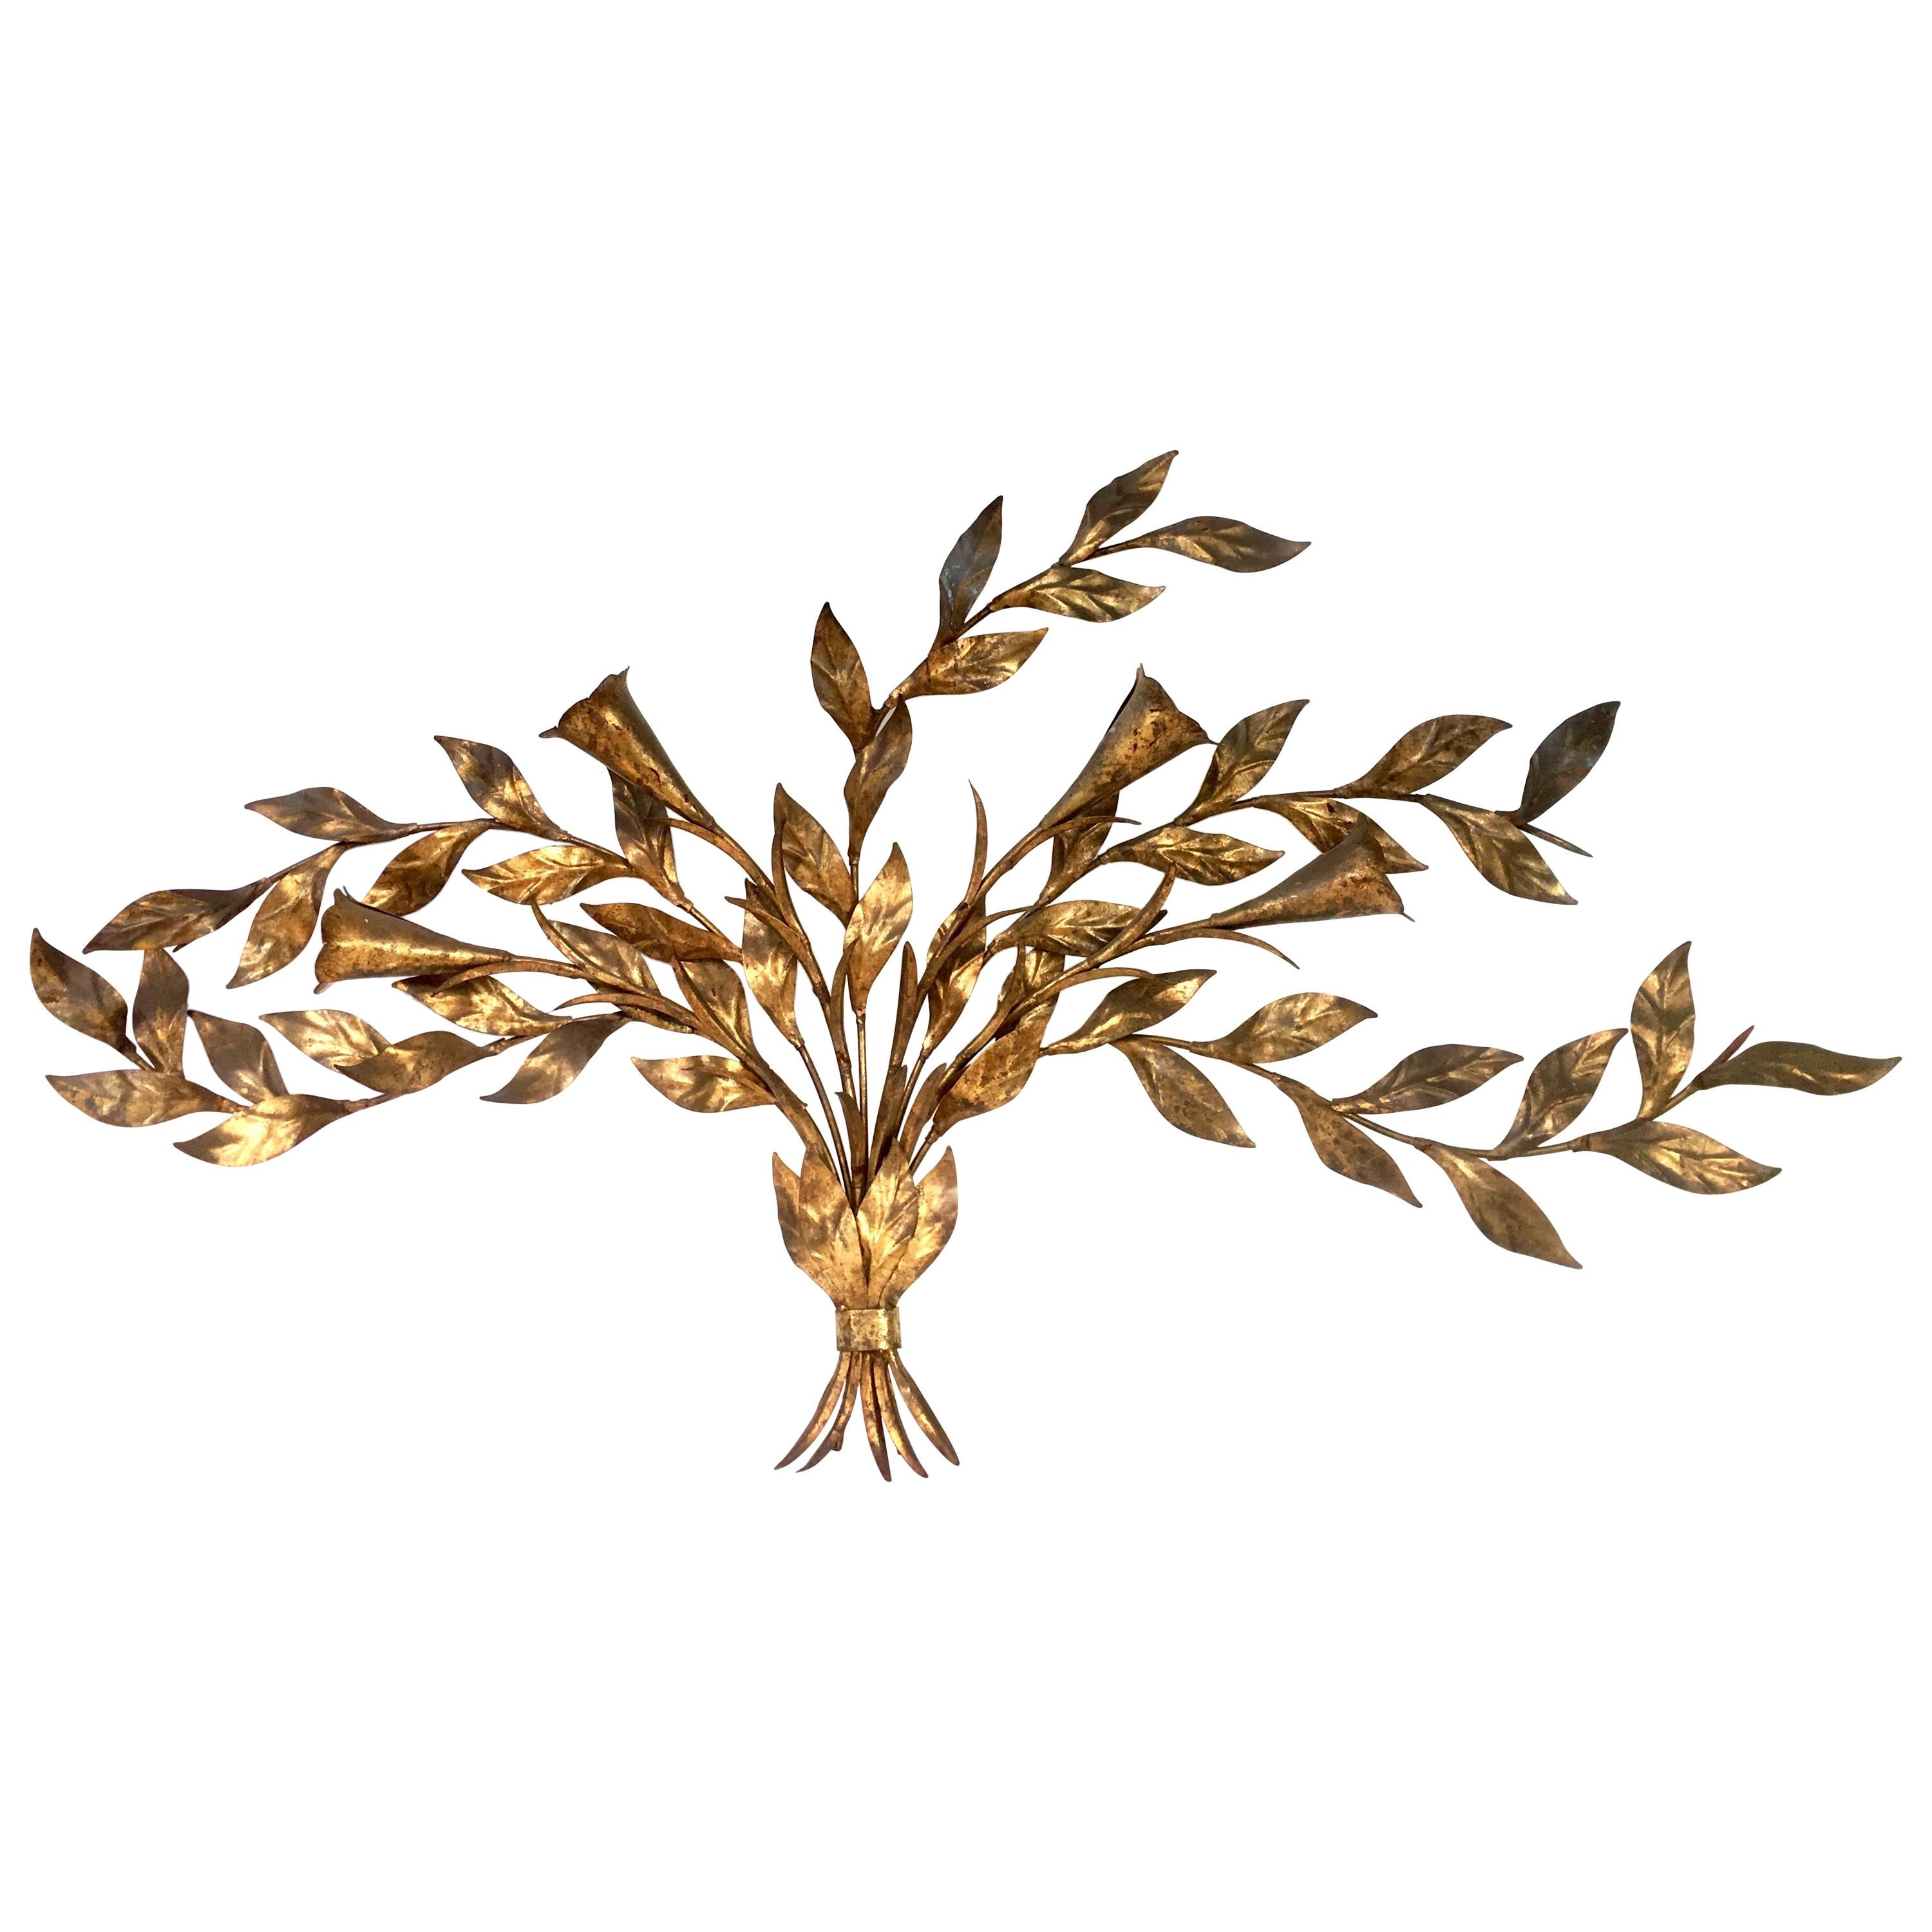 1950'S Monumental Italian Gold Leaf Floral Sheaf Wall Sculpture By Florentia For Sale